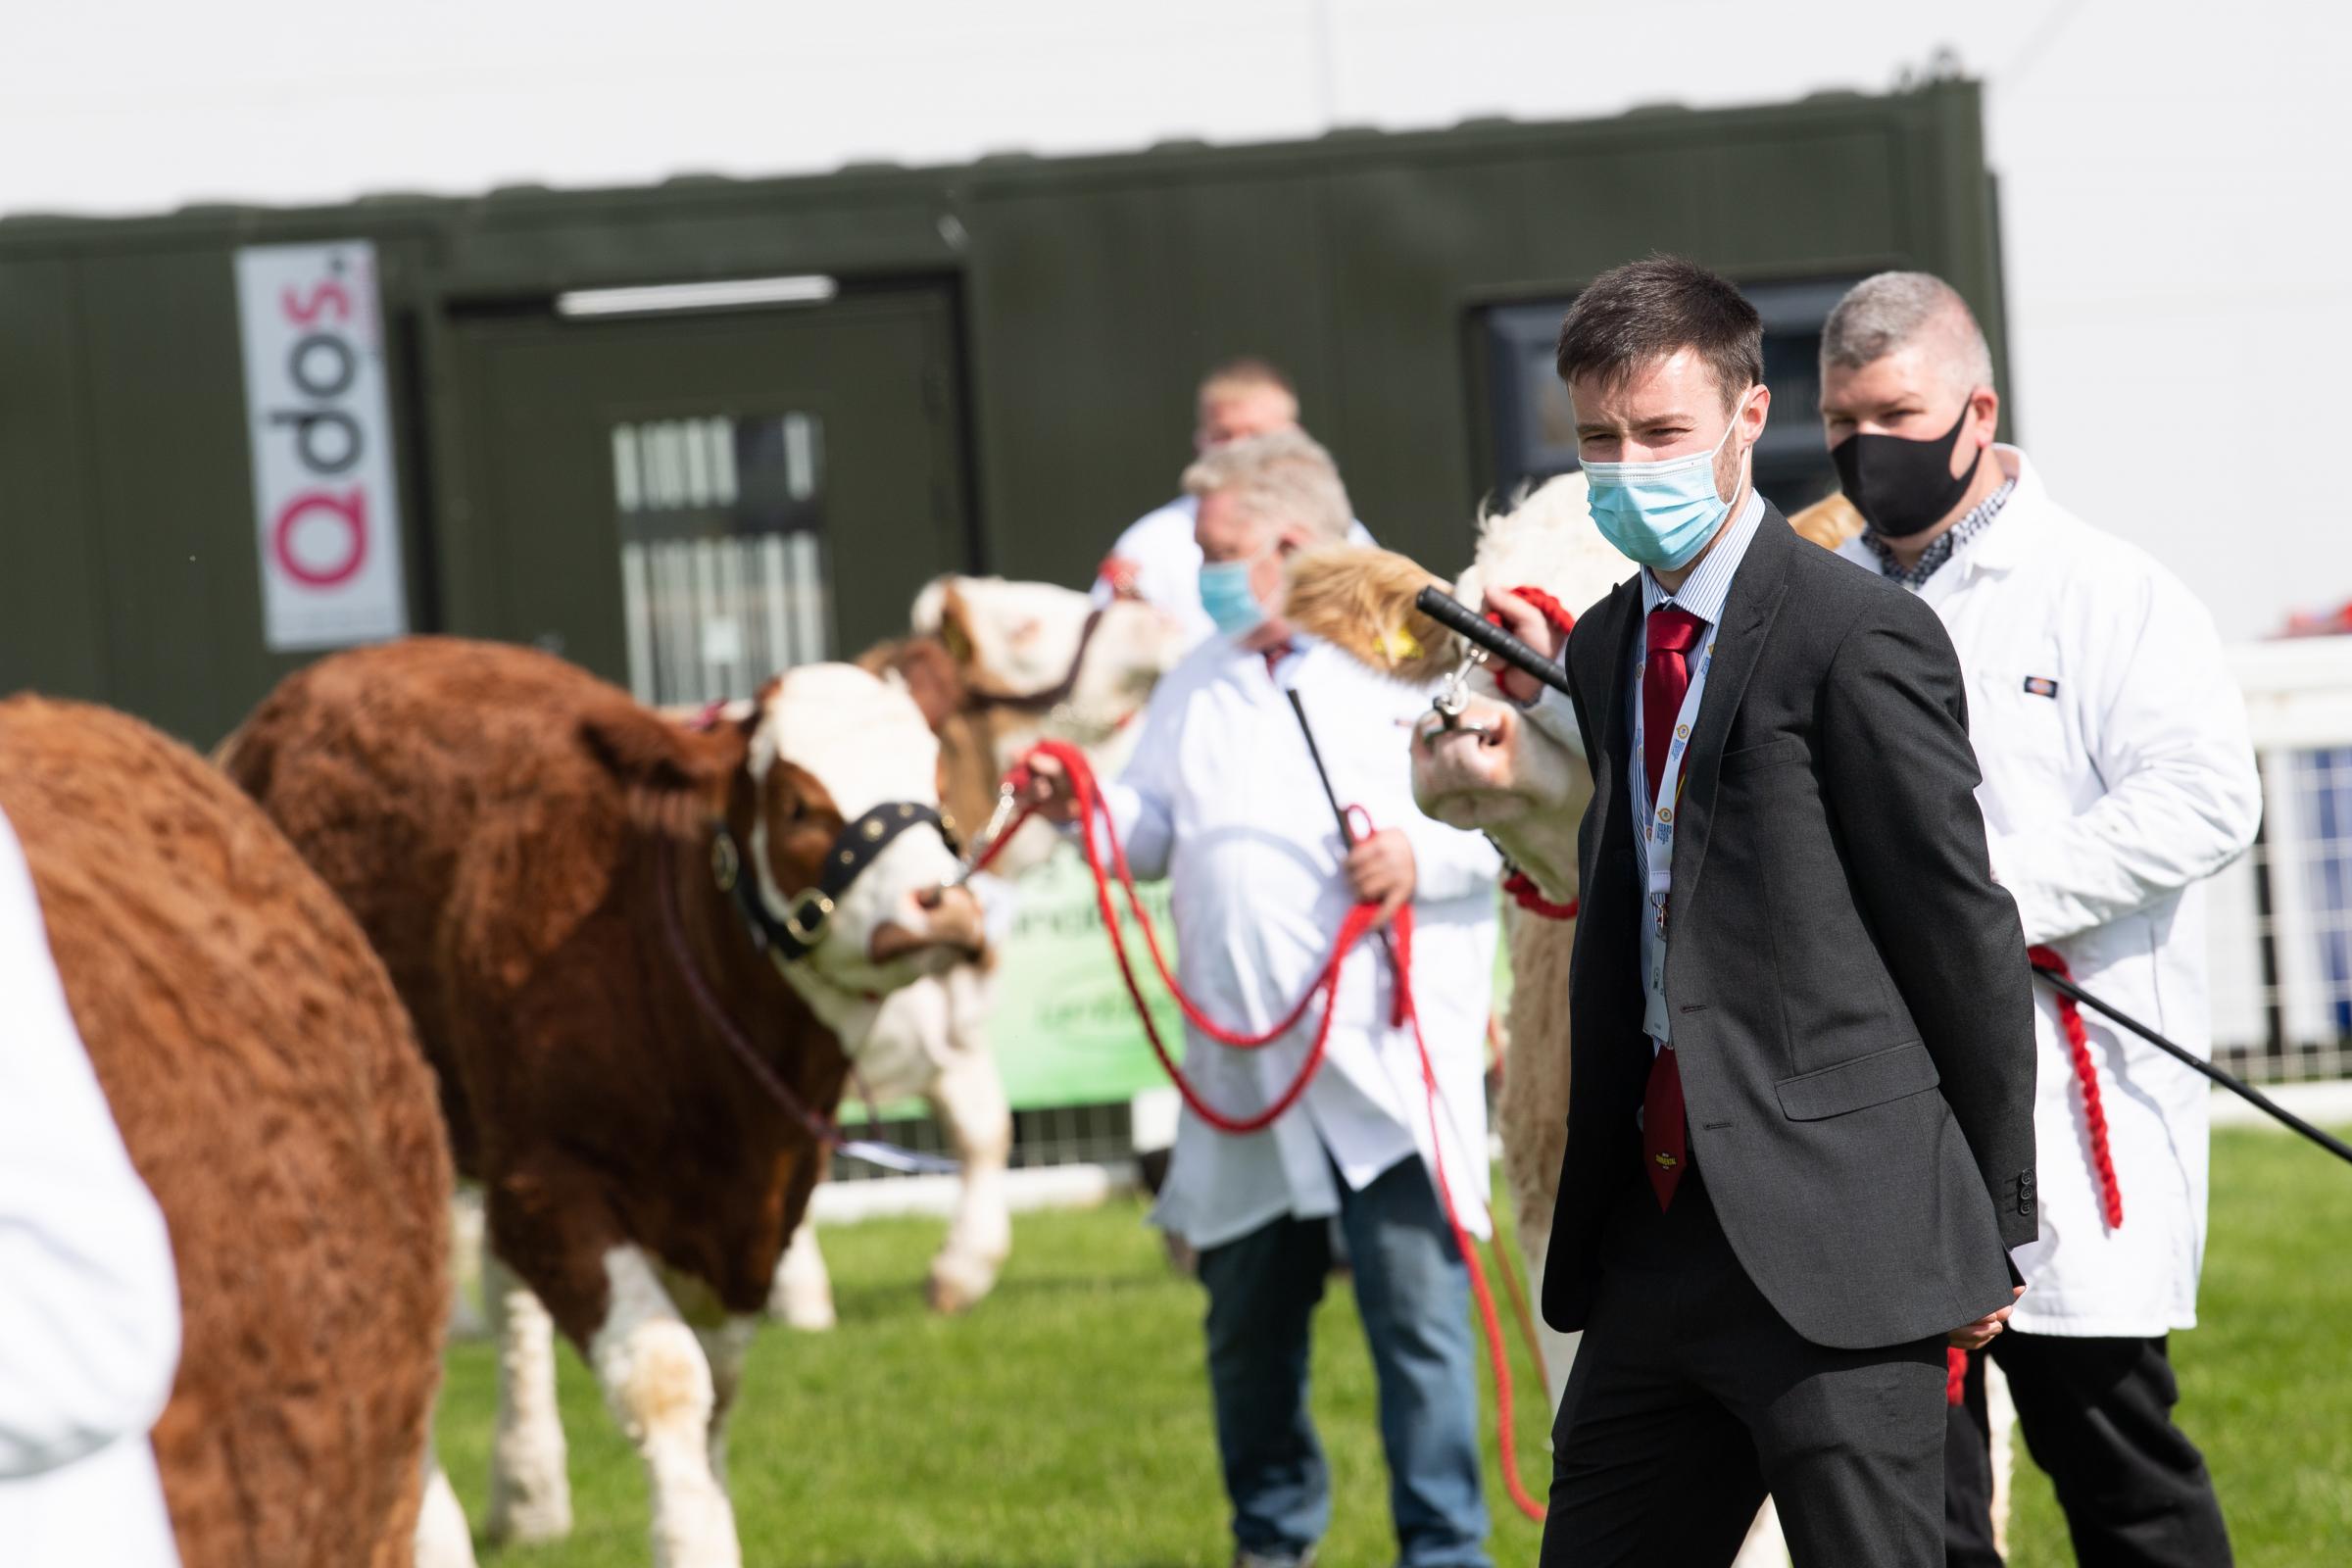 Tom Bruce studying the entries in the Simmental classes Ref:RH150621019 Rob Haining / The Scottish Farmer...